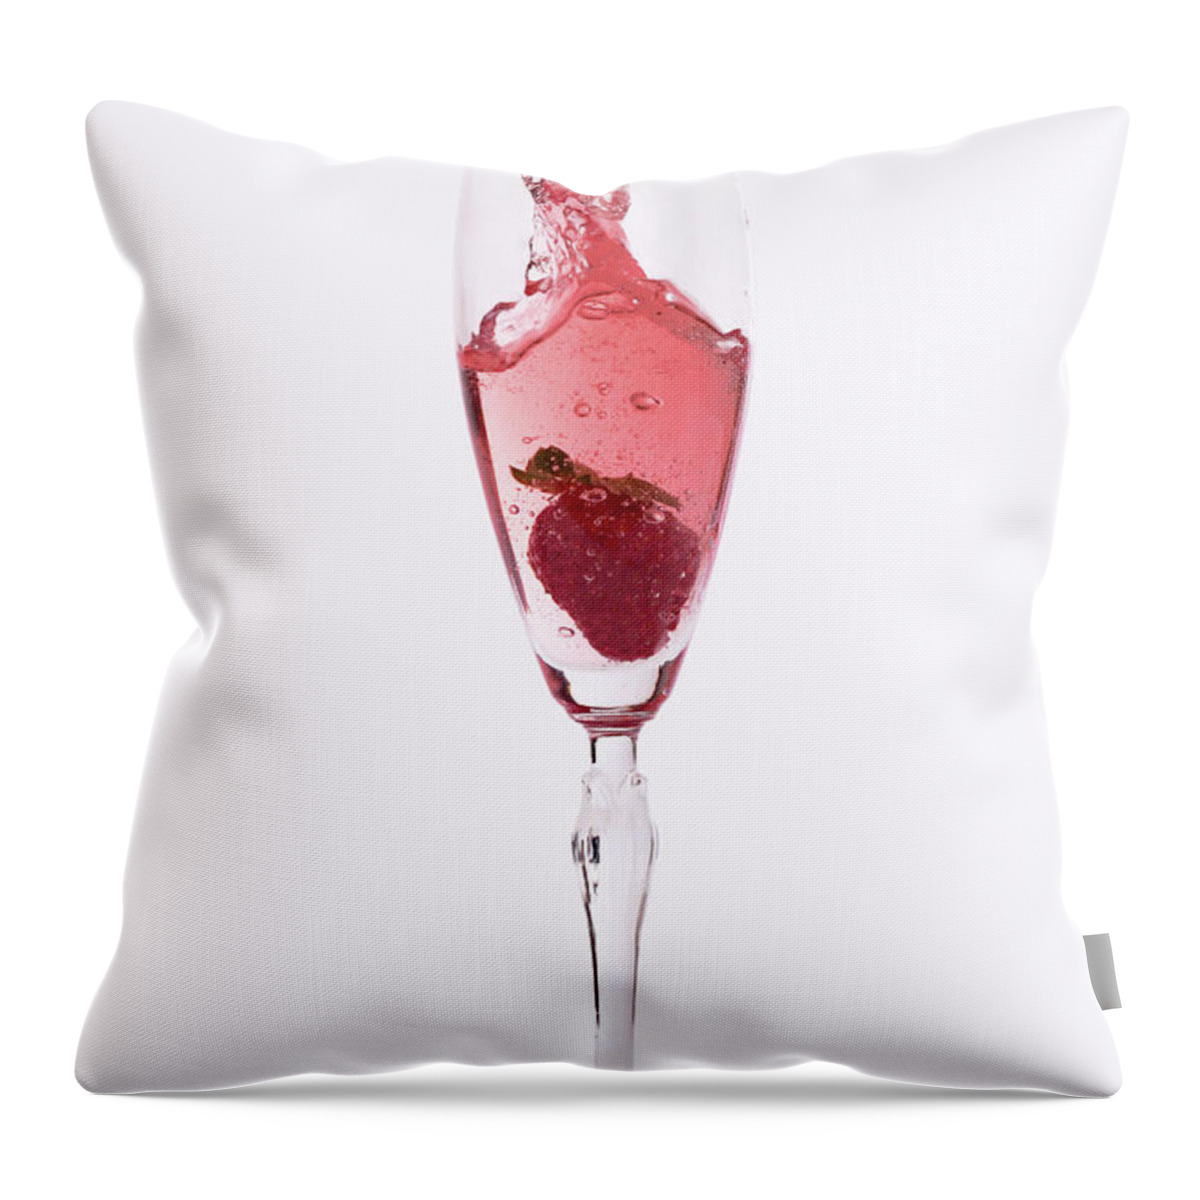 White Background Throw Pillow featuring the photograph Pink Champaigne And Strawberries by Johndmartin